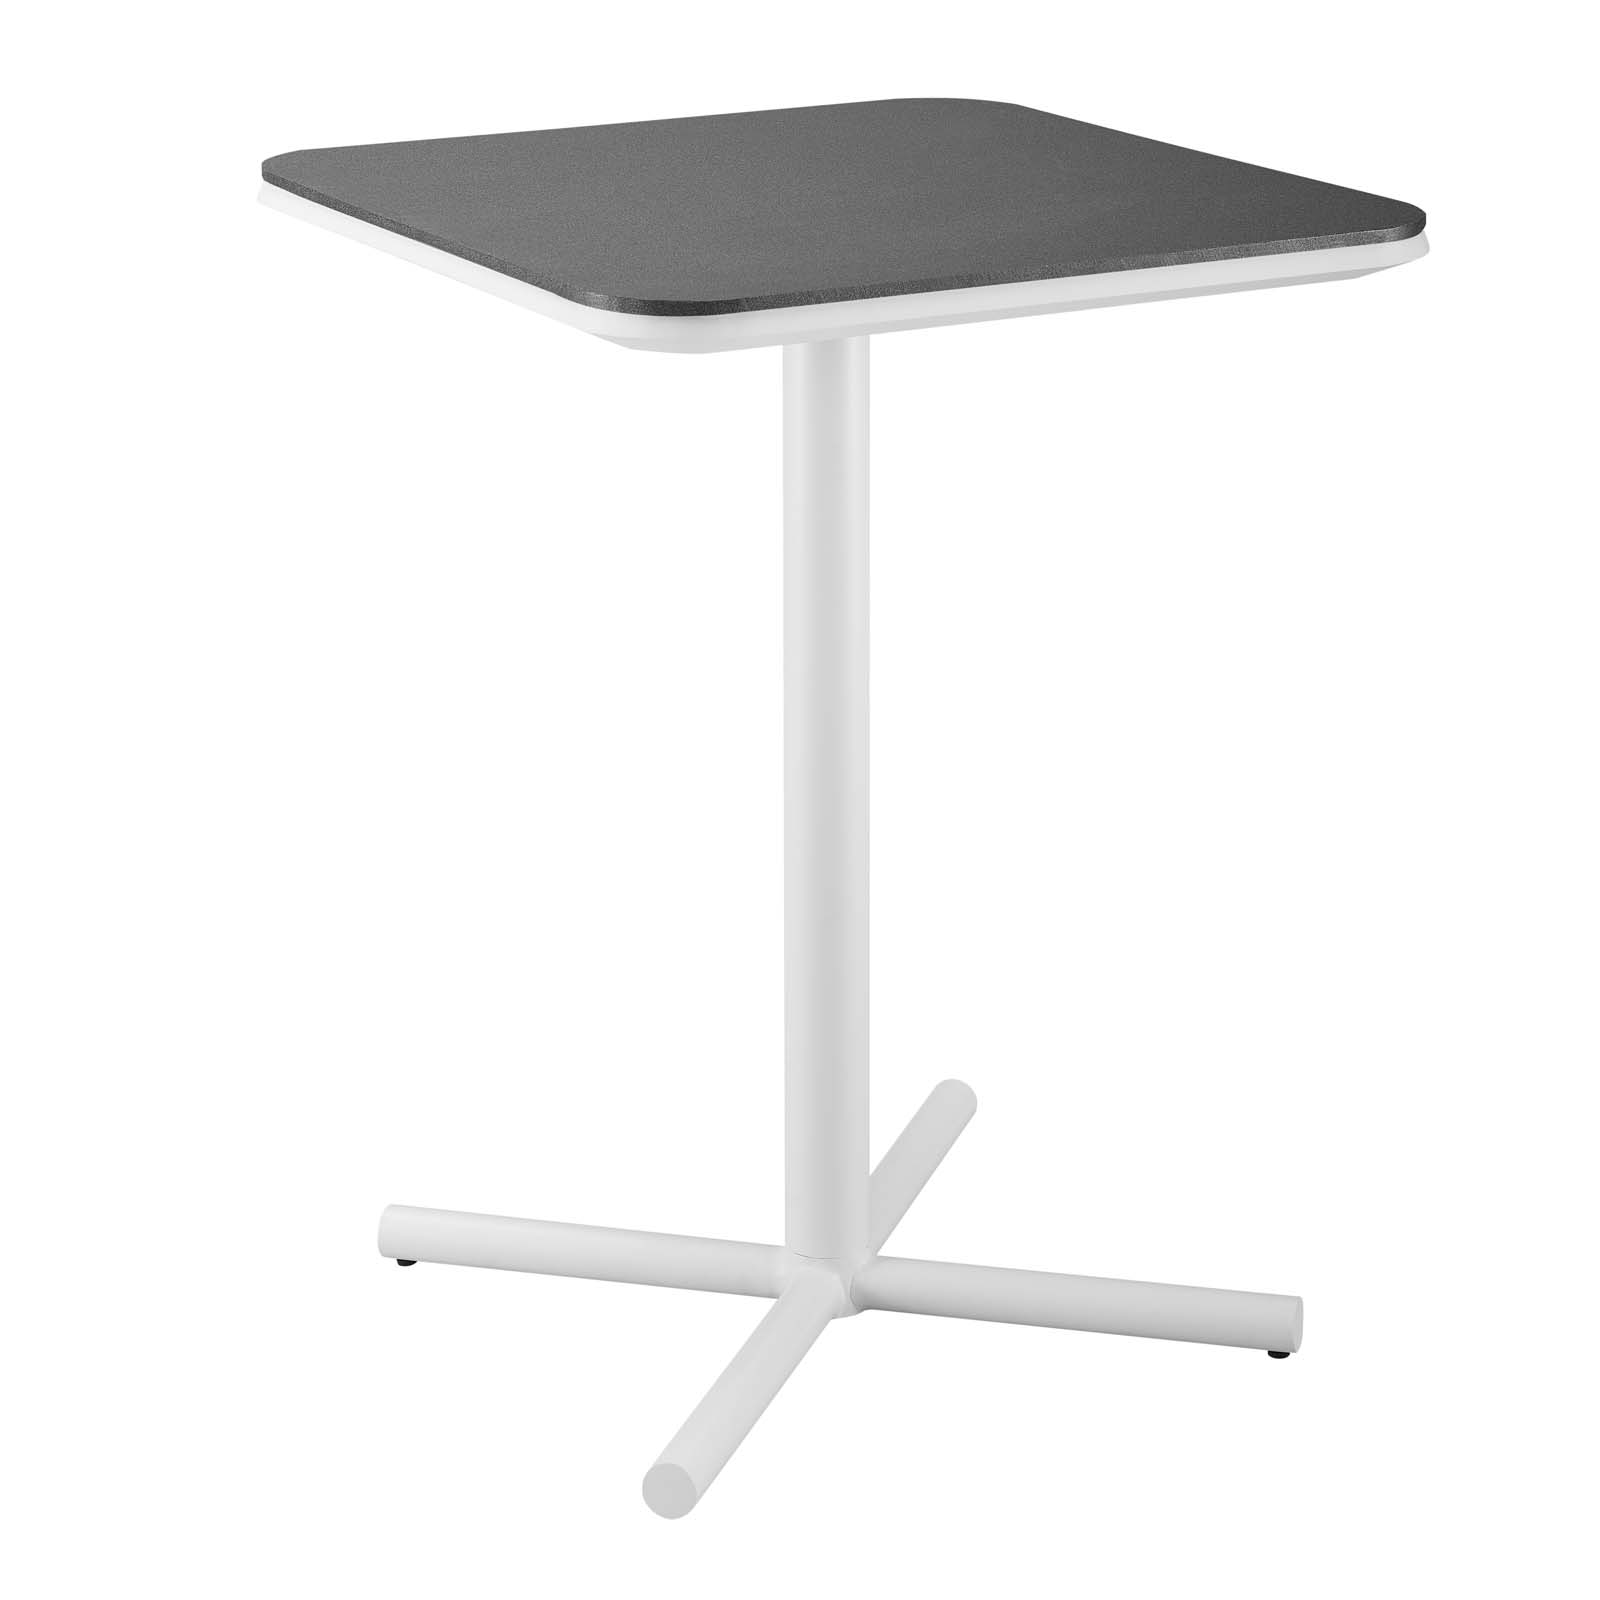 Modway Raleigh Modern Style Aluminum Outdoor Patio Bar Table in White - image 3 of 7